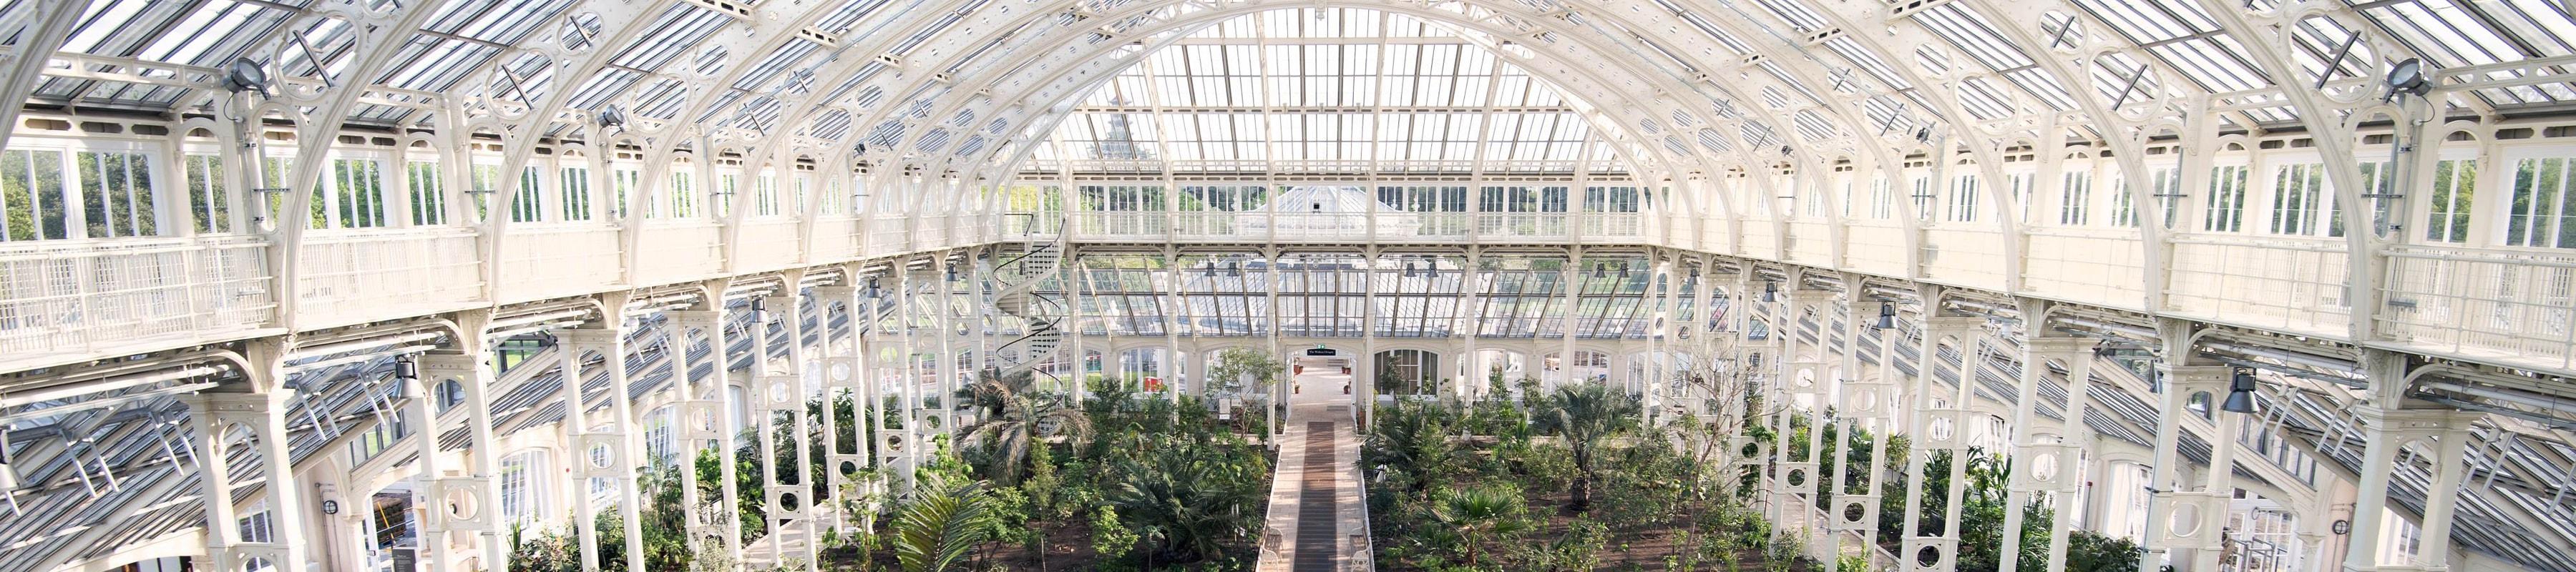 Cultivating History: Kew Gardens